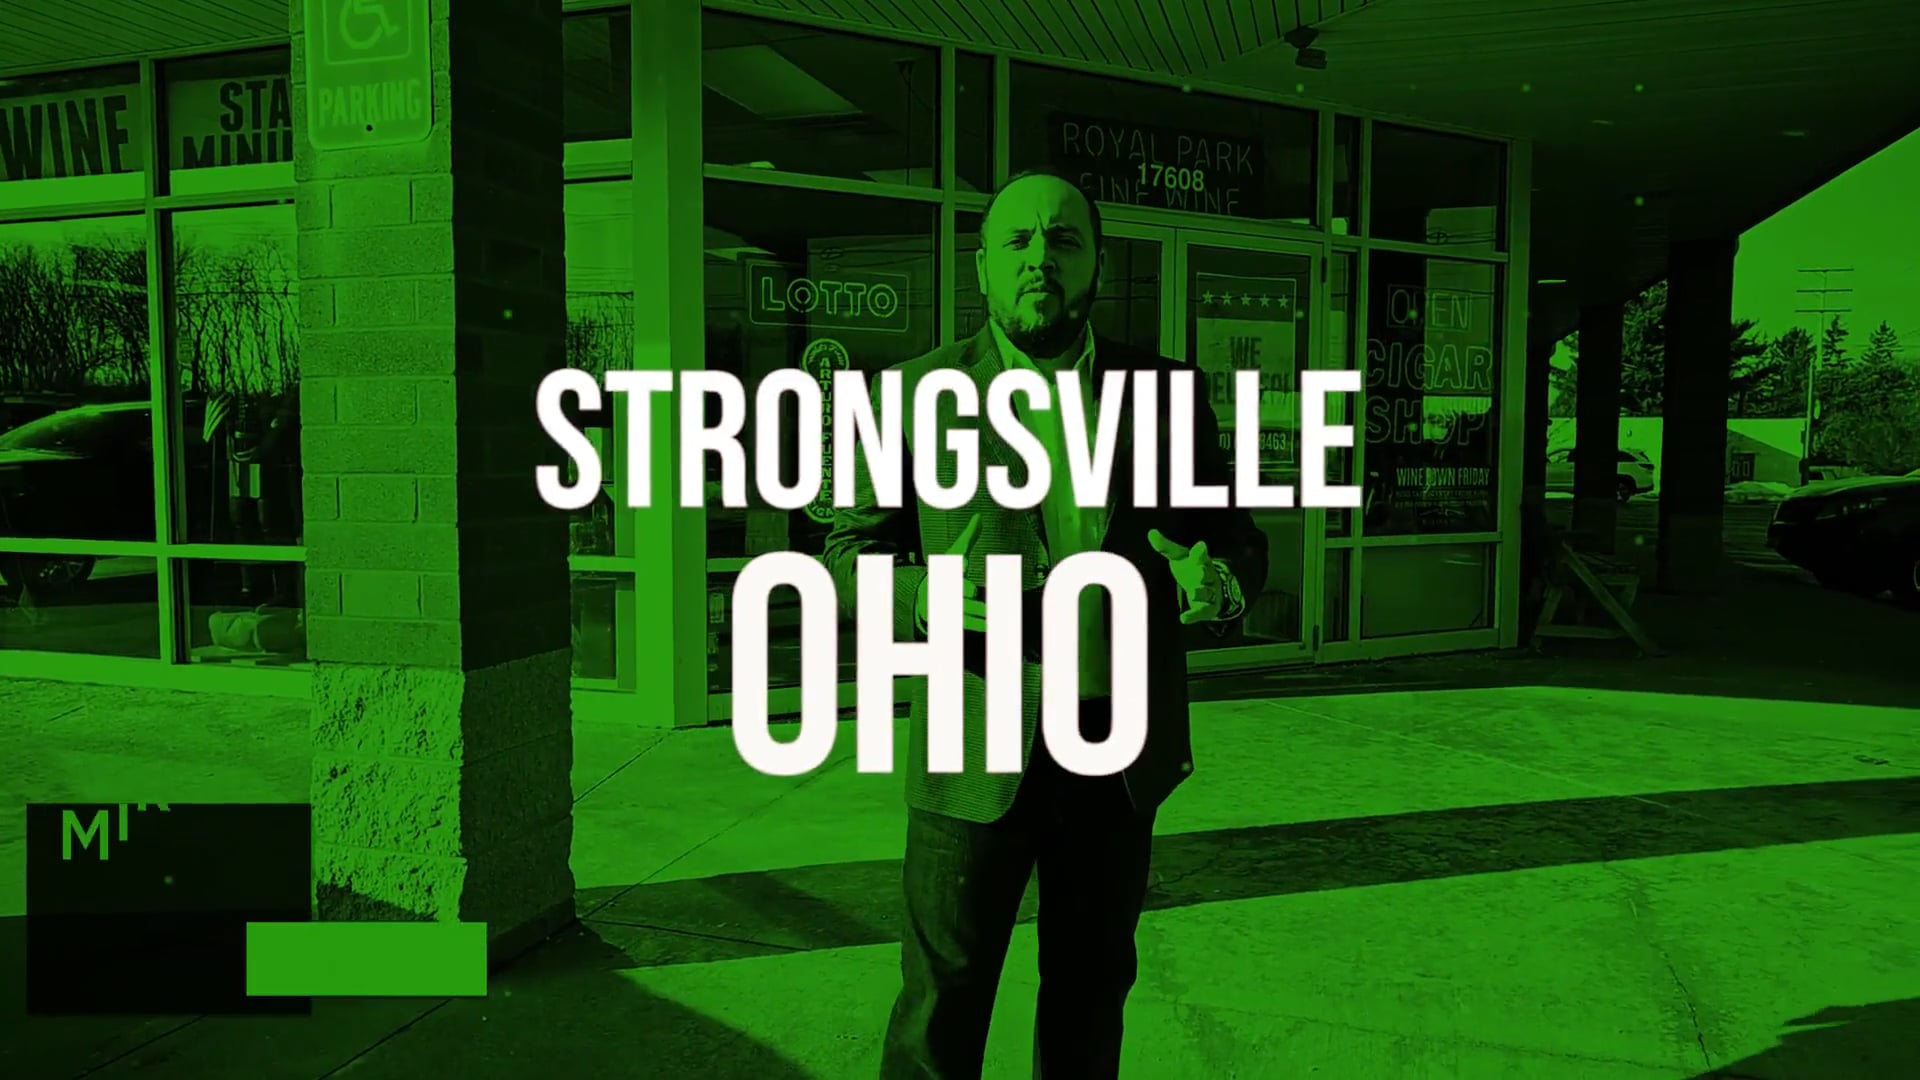 Strongsville Ohio - Mike Incorvaia Jr.